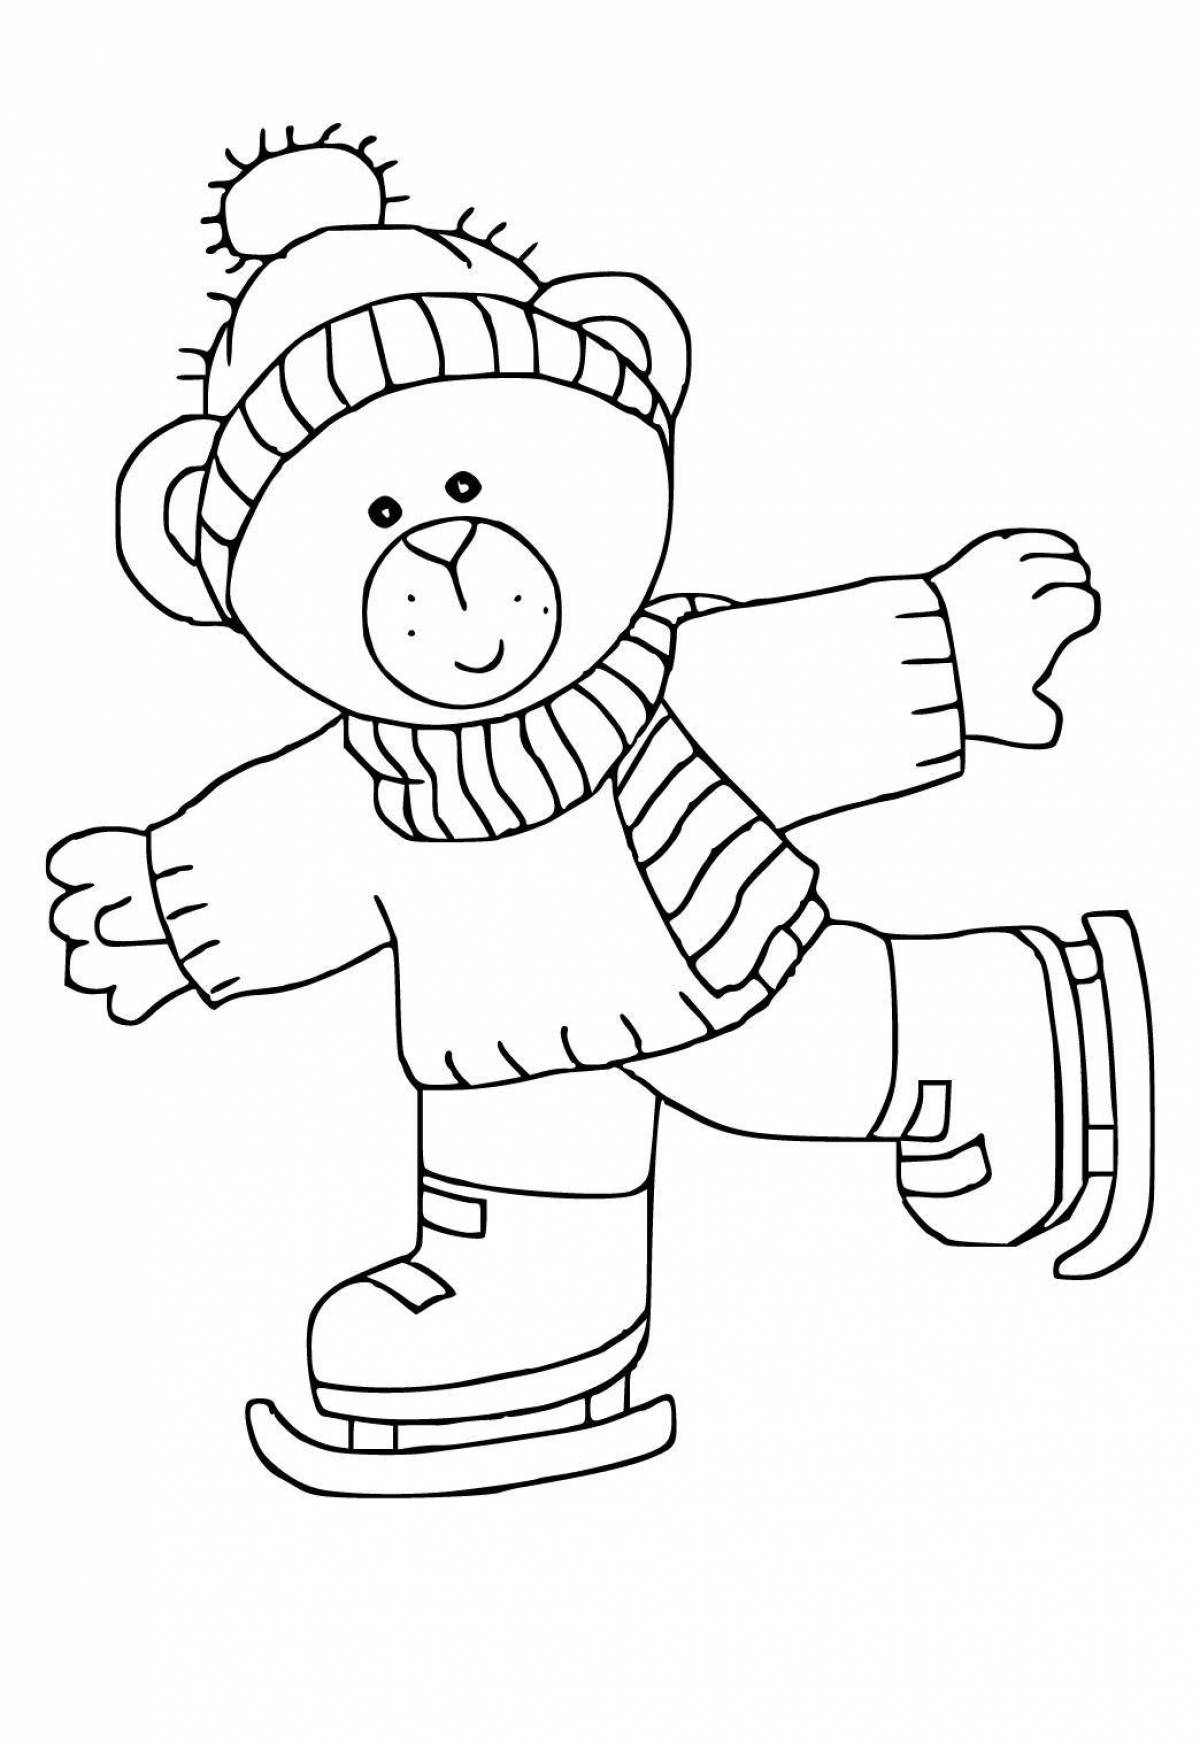 Awesome winter coloring pages for kids